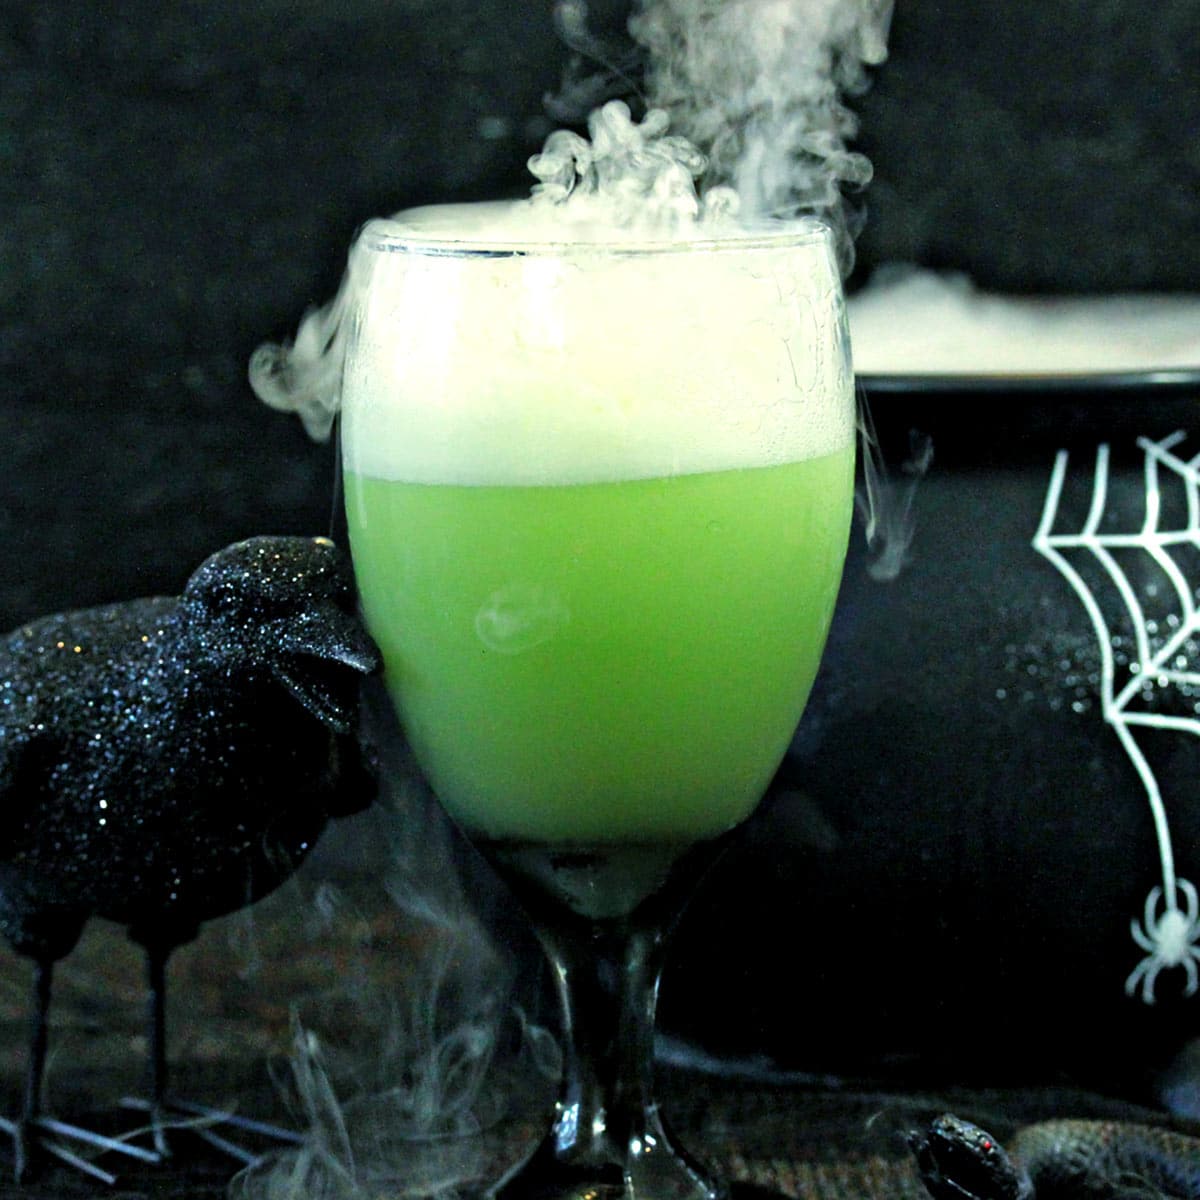 https://www.sugarhero.com/wp-content/uploads/2022/06/witches-brew-halloween-punch-square-1200.jpg